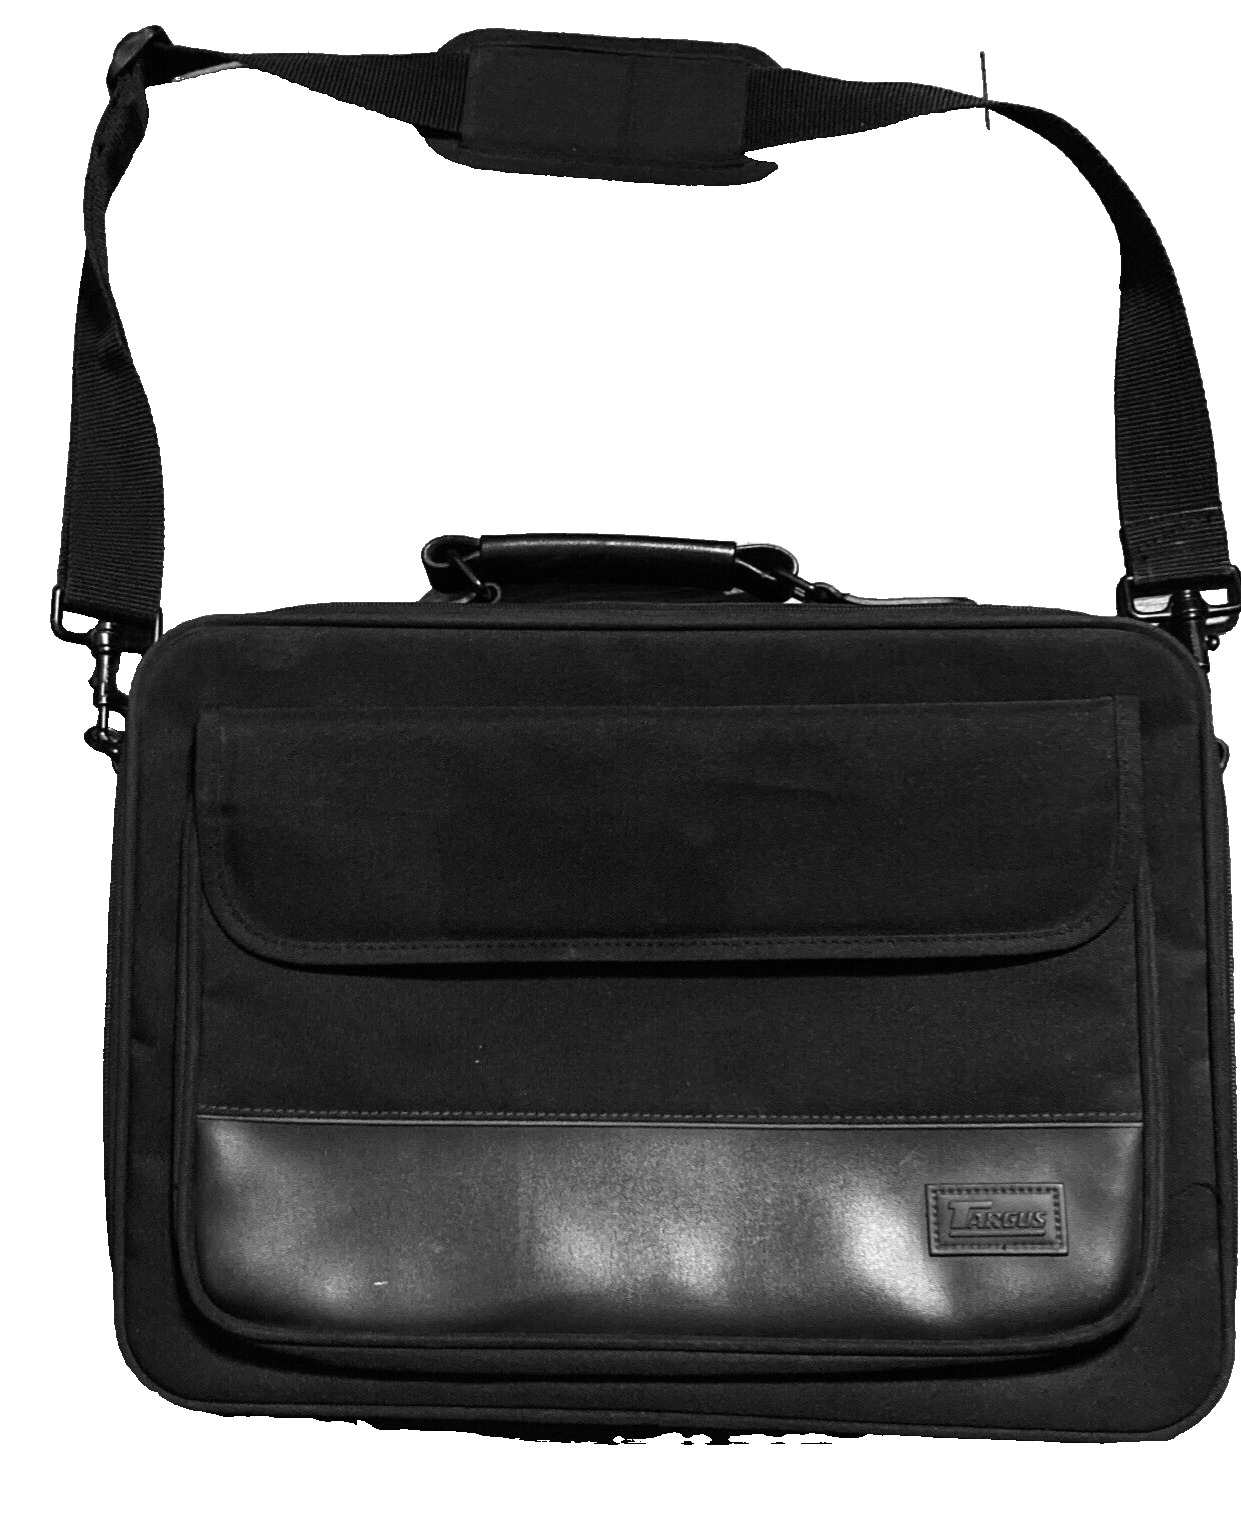 Targus Laptop Bag w/ Cross Body Padded Strap-Outside and Interior Storage CN01